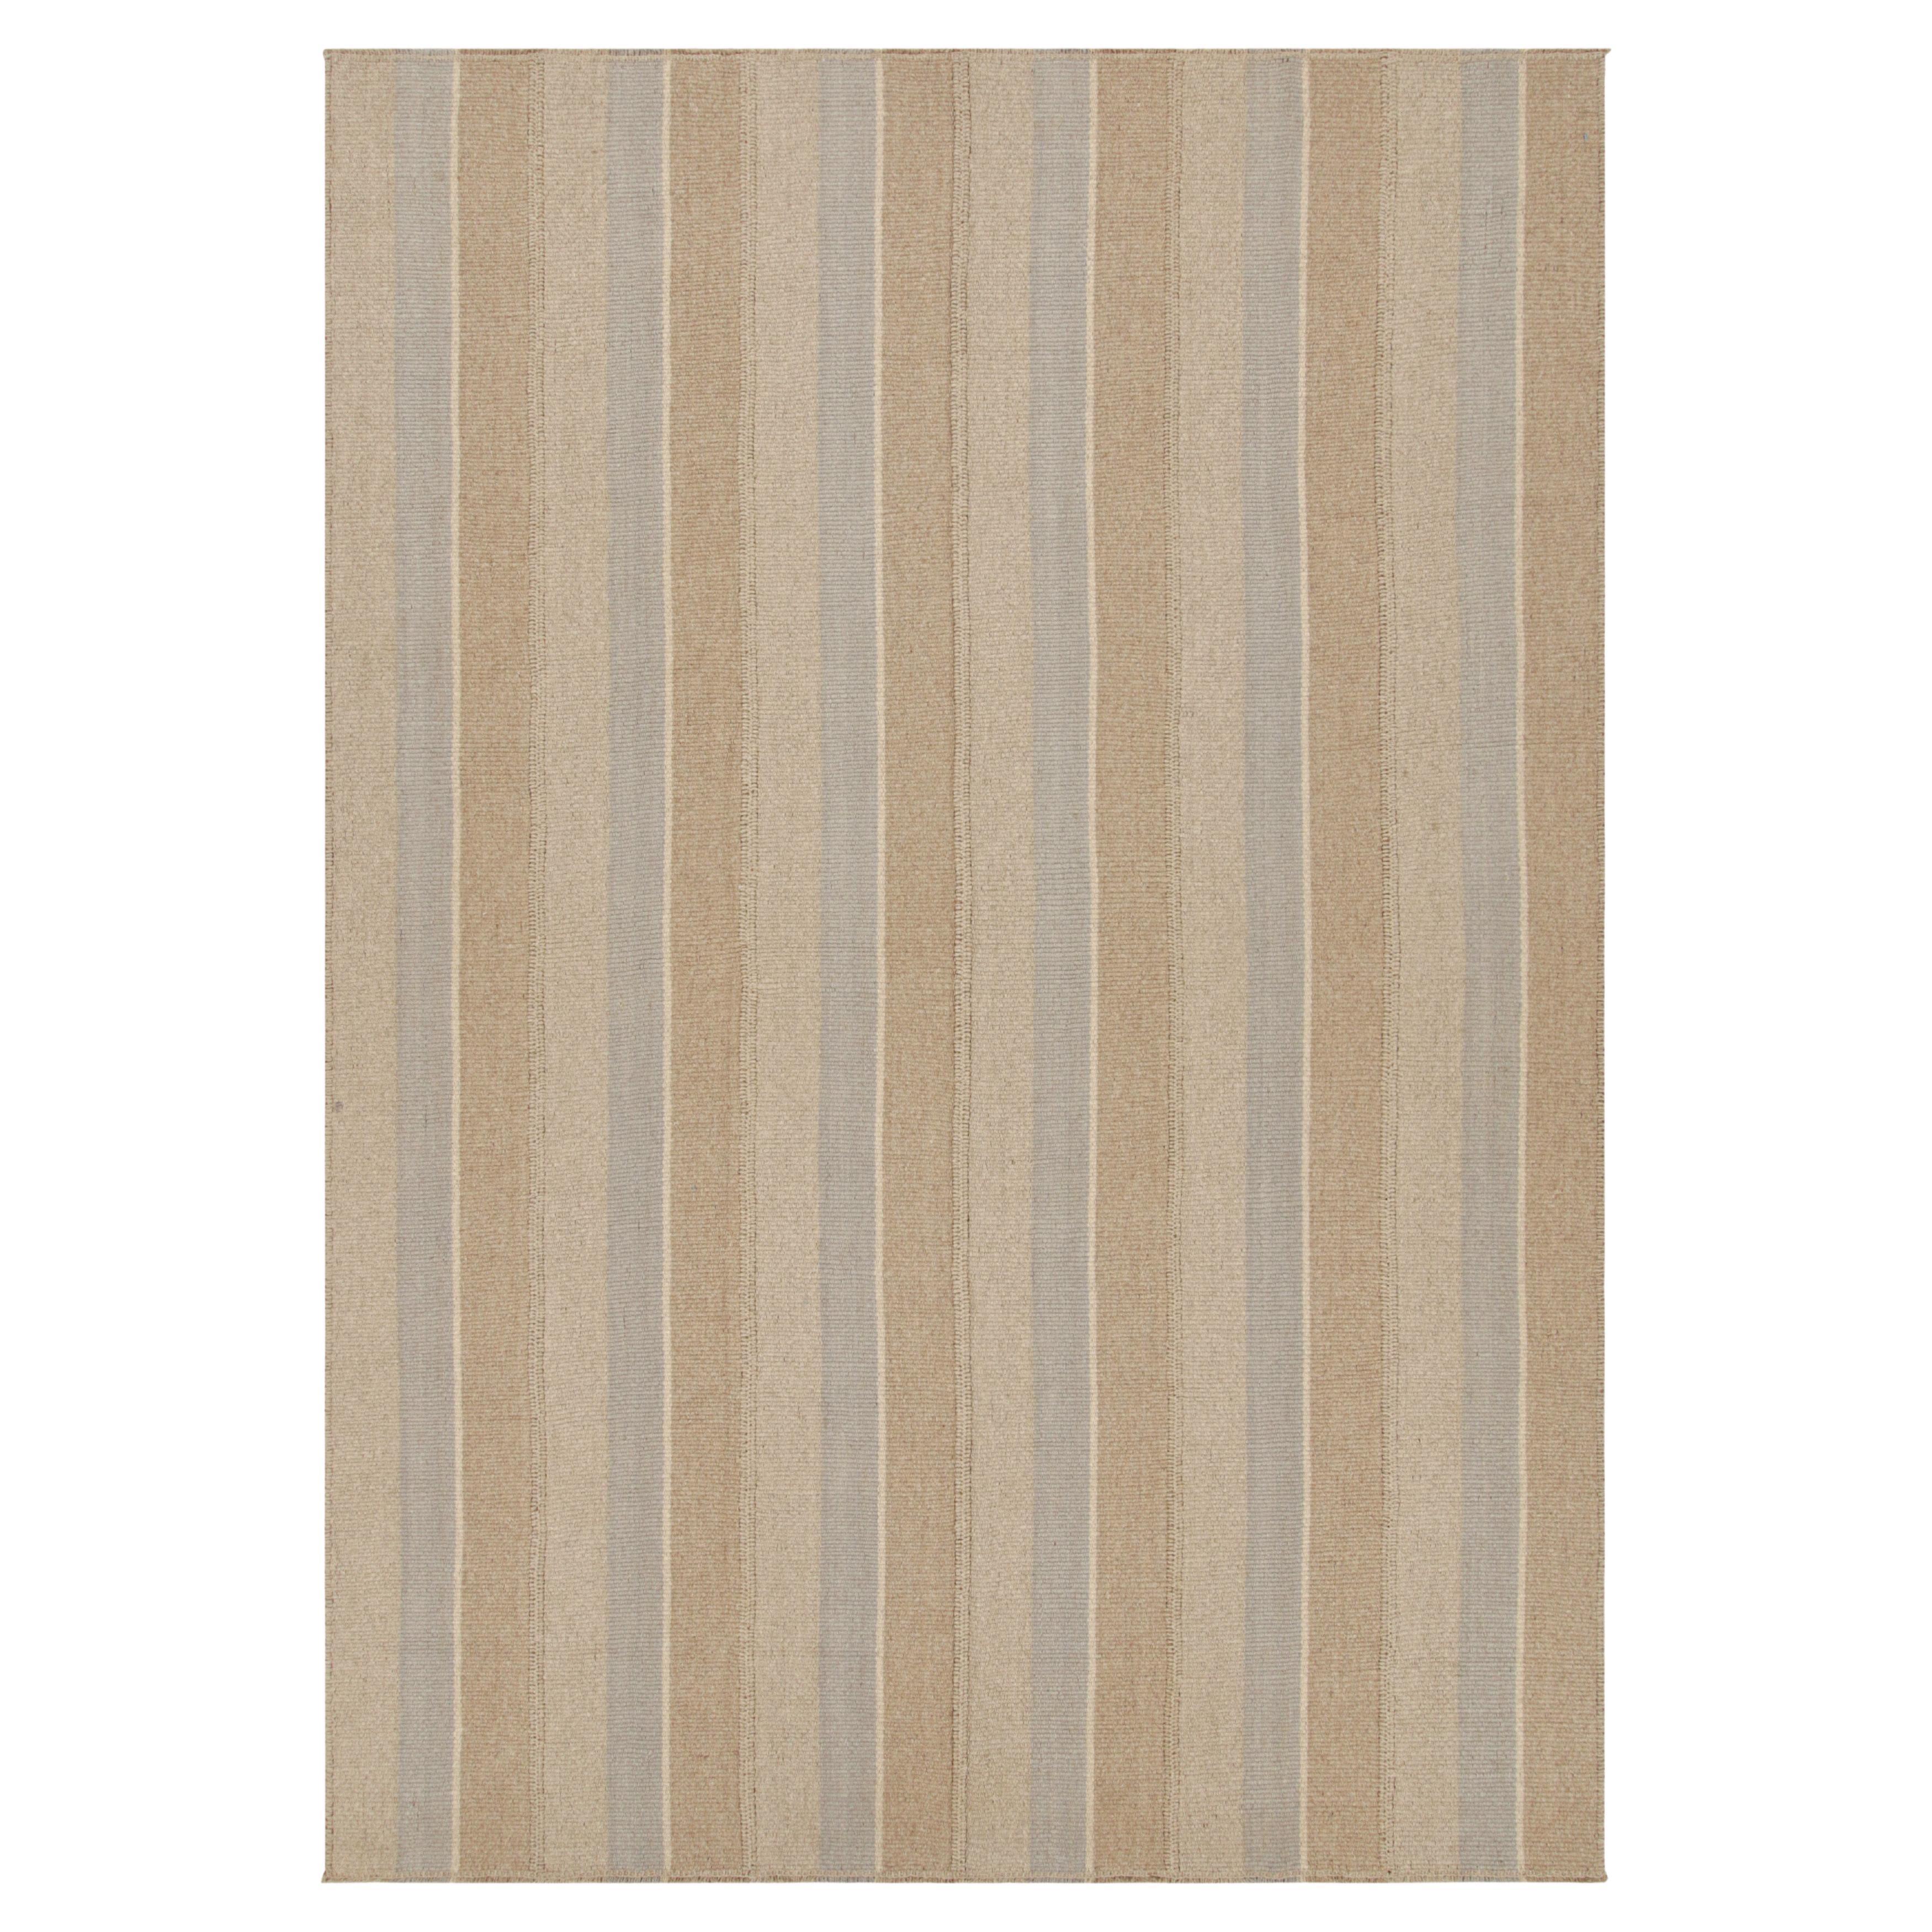 Rug & Kilim’s Contemporary Kilim in Gray and Beige-Brown Textural Stripes 